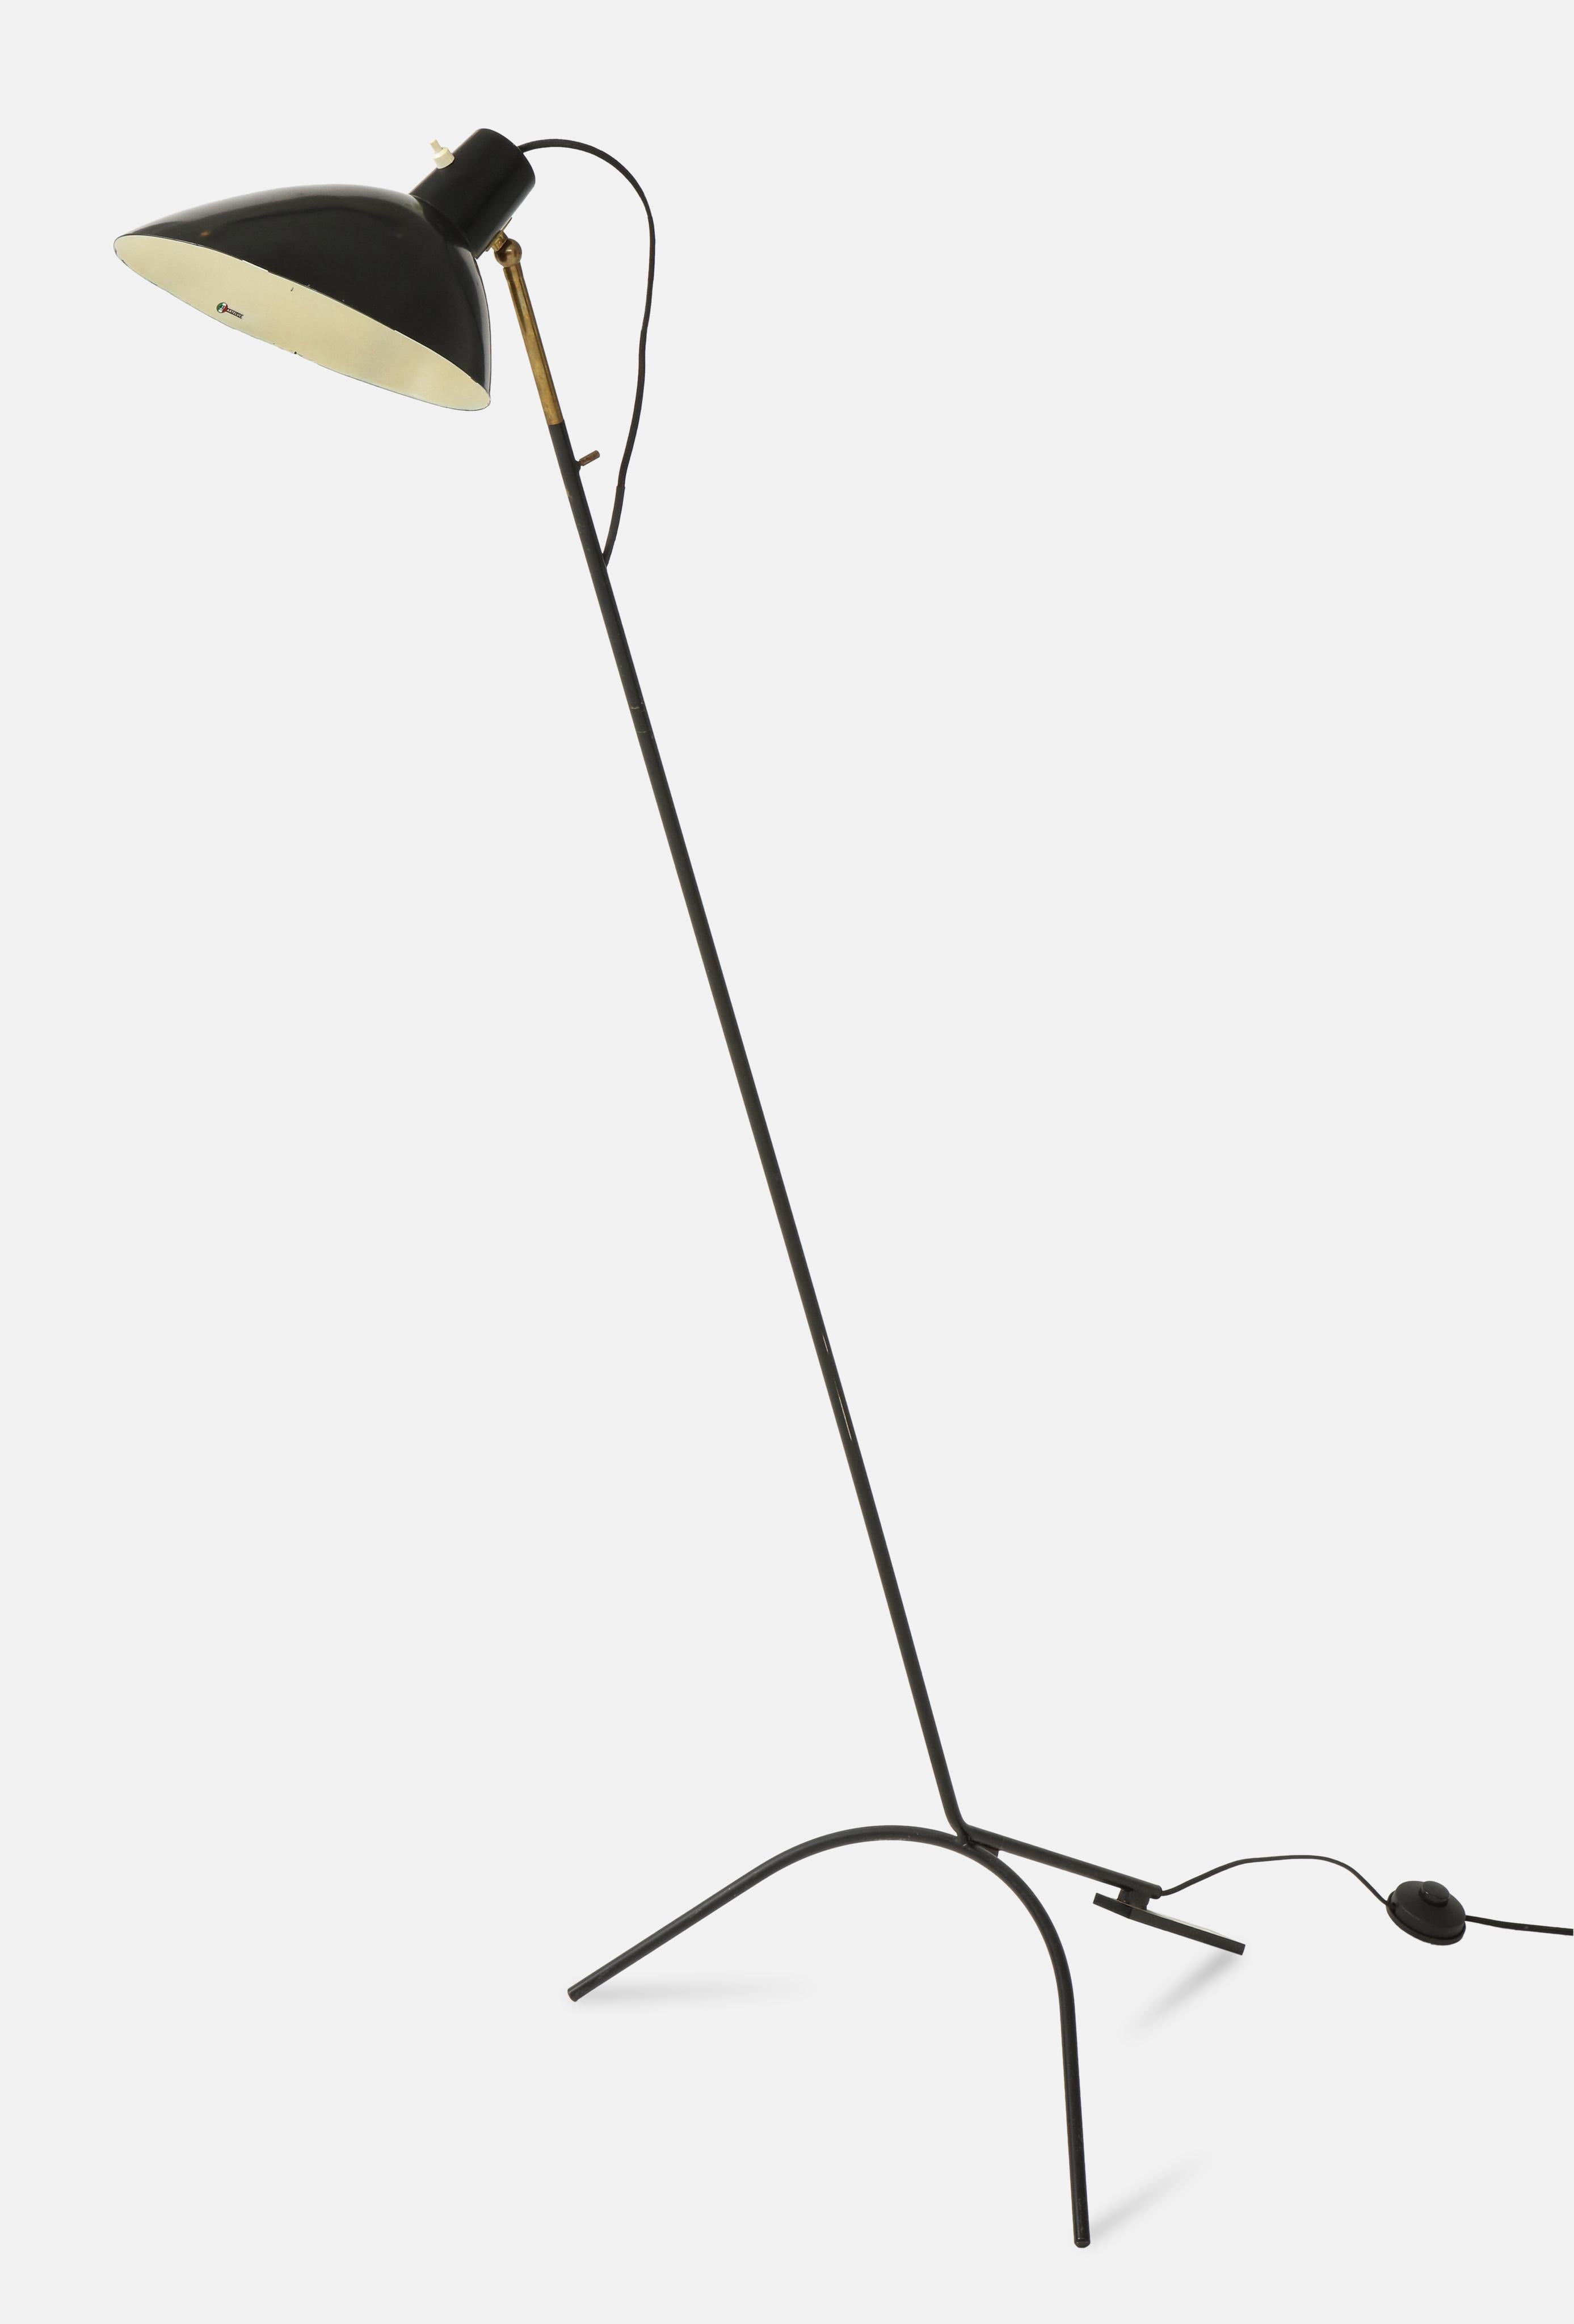 Designed by Vittoriano Vigano and manufactured by Arteluce in Italy, circa 1951, rare and original floor lamp model 1047 with black lacquered aluminum adjustable shade on brass stem and tripod base, with original manufacturer's label inside the